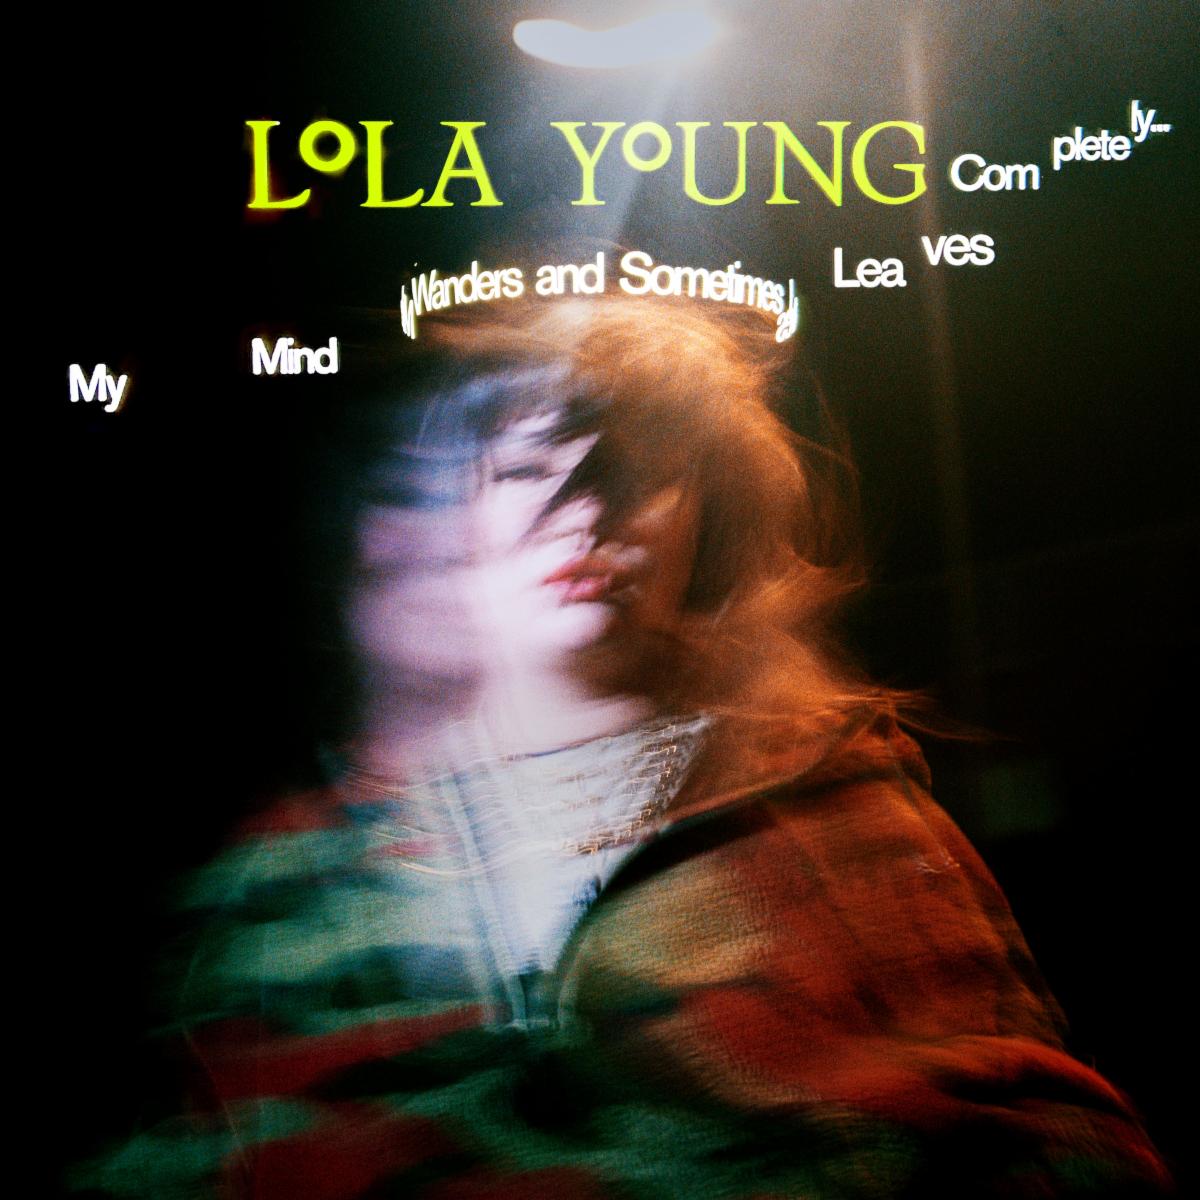 Lola Young Album 'My Mind Wanders And Sometimes Leaves Completely' Out Now
#LolaYoung

rawemag.org/lola-young-alb…